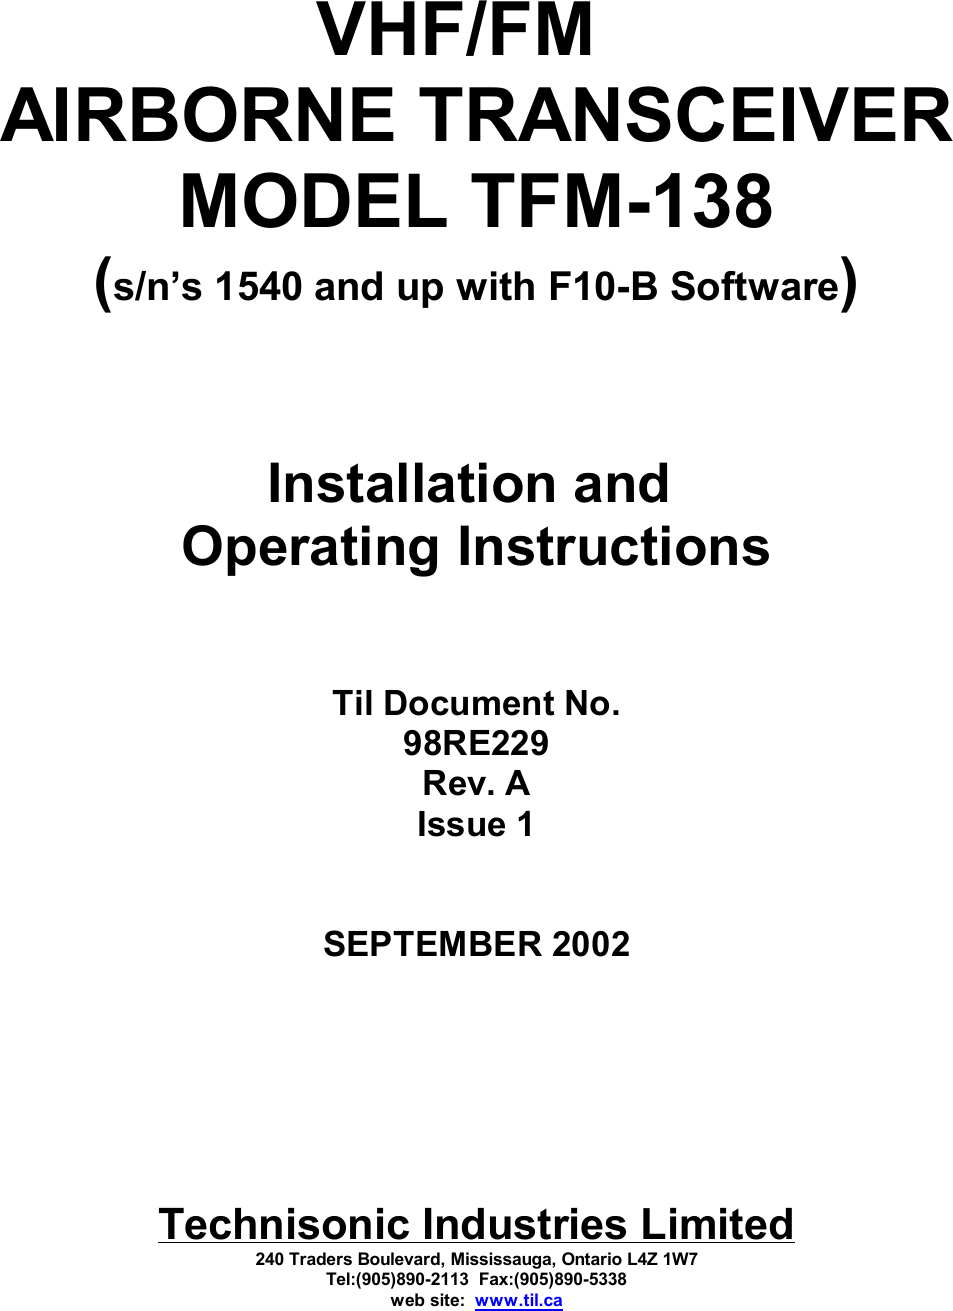 VHF/FM  AIRBORNE TRANSCEIVERMODEL TFM-138(s/n’s 1540 and up with F10-B Software)Installation and Operating InstructionsTil Document No.98RE229Rev. AIssue 1SEPTEMBER 2002Technisonic Industries Limited240 Traders Boulevard, Mississauga, Ontario L4Z 1W7Tel:(905)890-2113  Fax:(905)890-5338web site:  www.til.ca